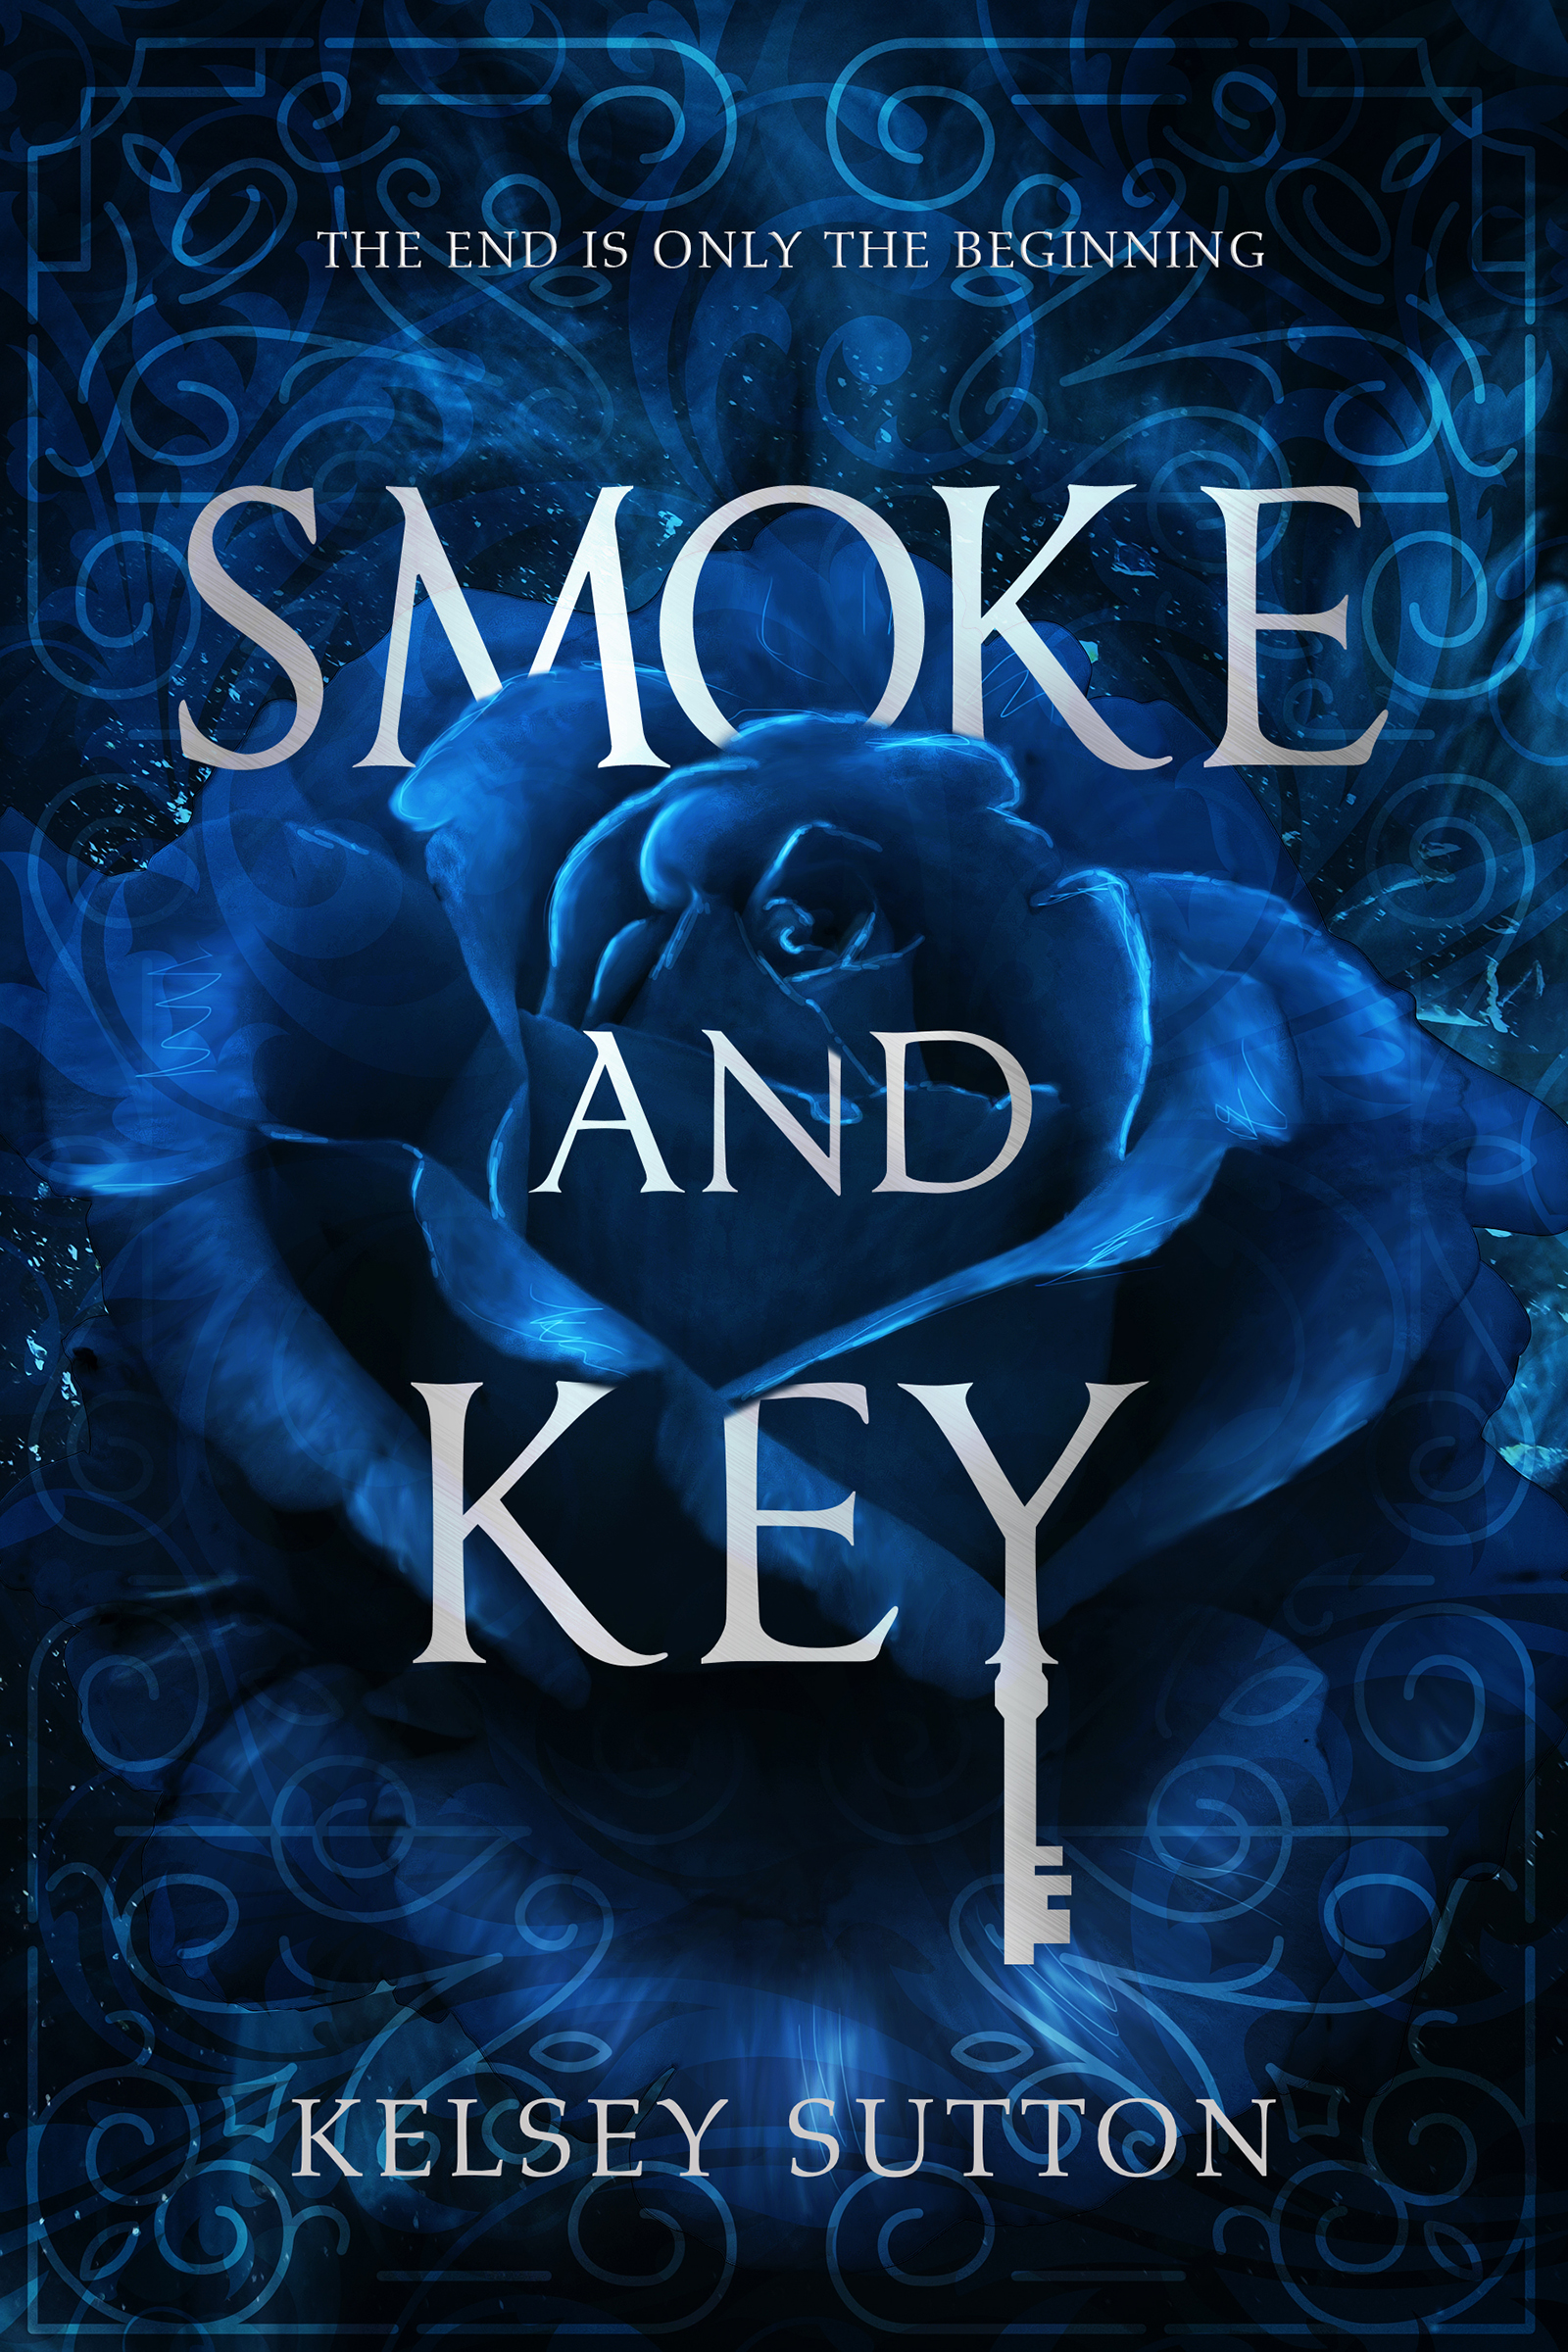 Smoke And Keyby Kelsey Sutton